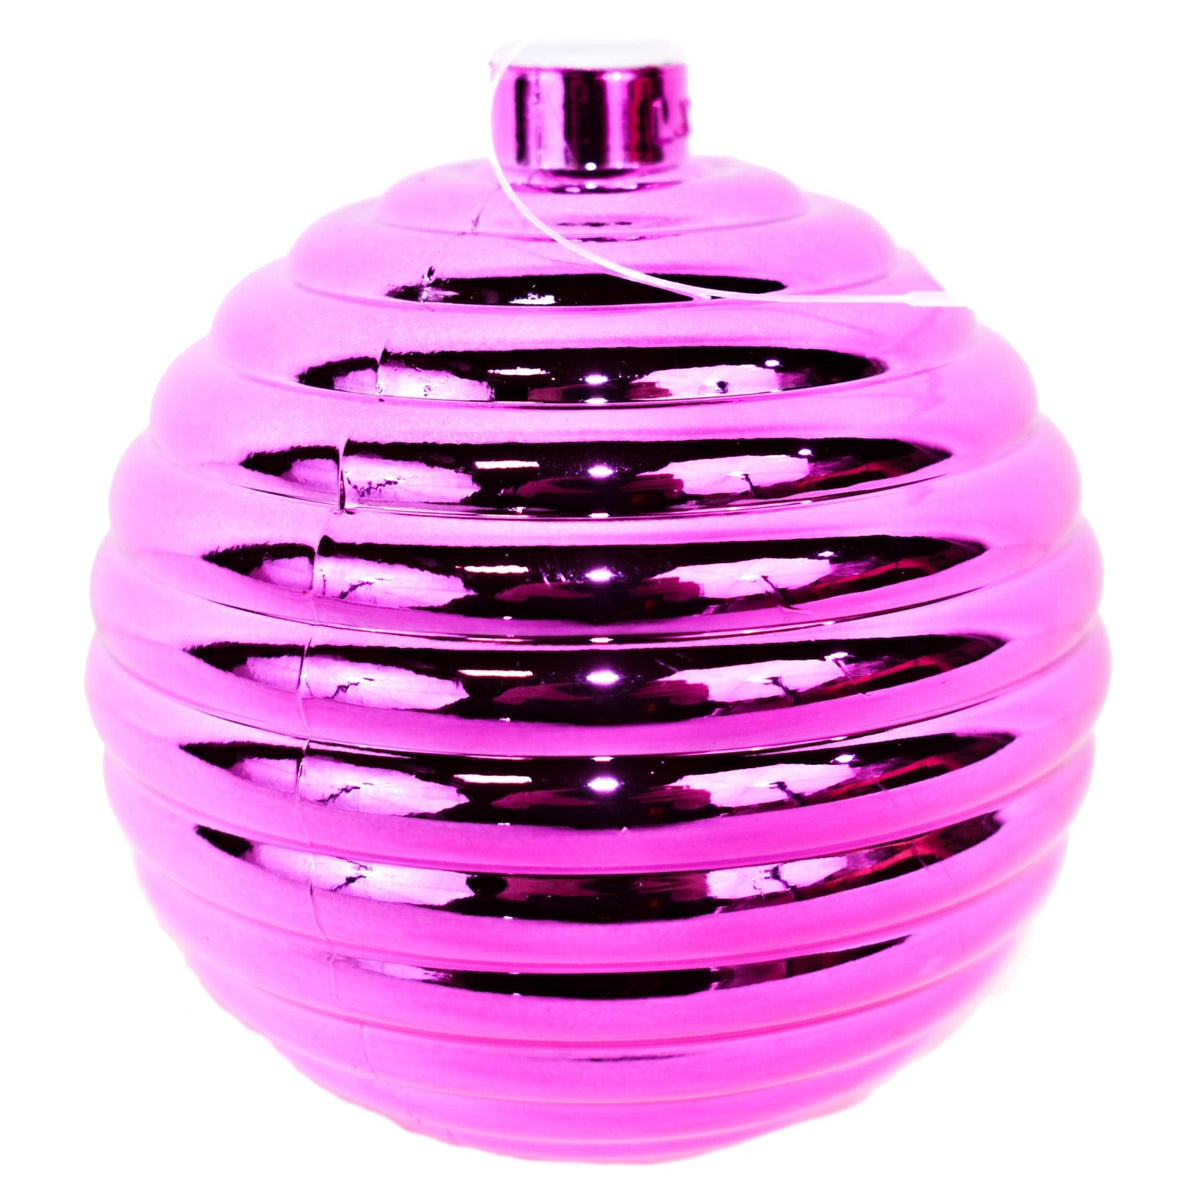 Lee Display offers brand new Shiny Pink Blush Ribbed Plastic Ball Ornaments at wholesale prices for affordable Christmas Tree Hanging and Holiday Decorating on sale at leedisplay.com